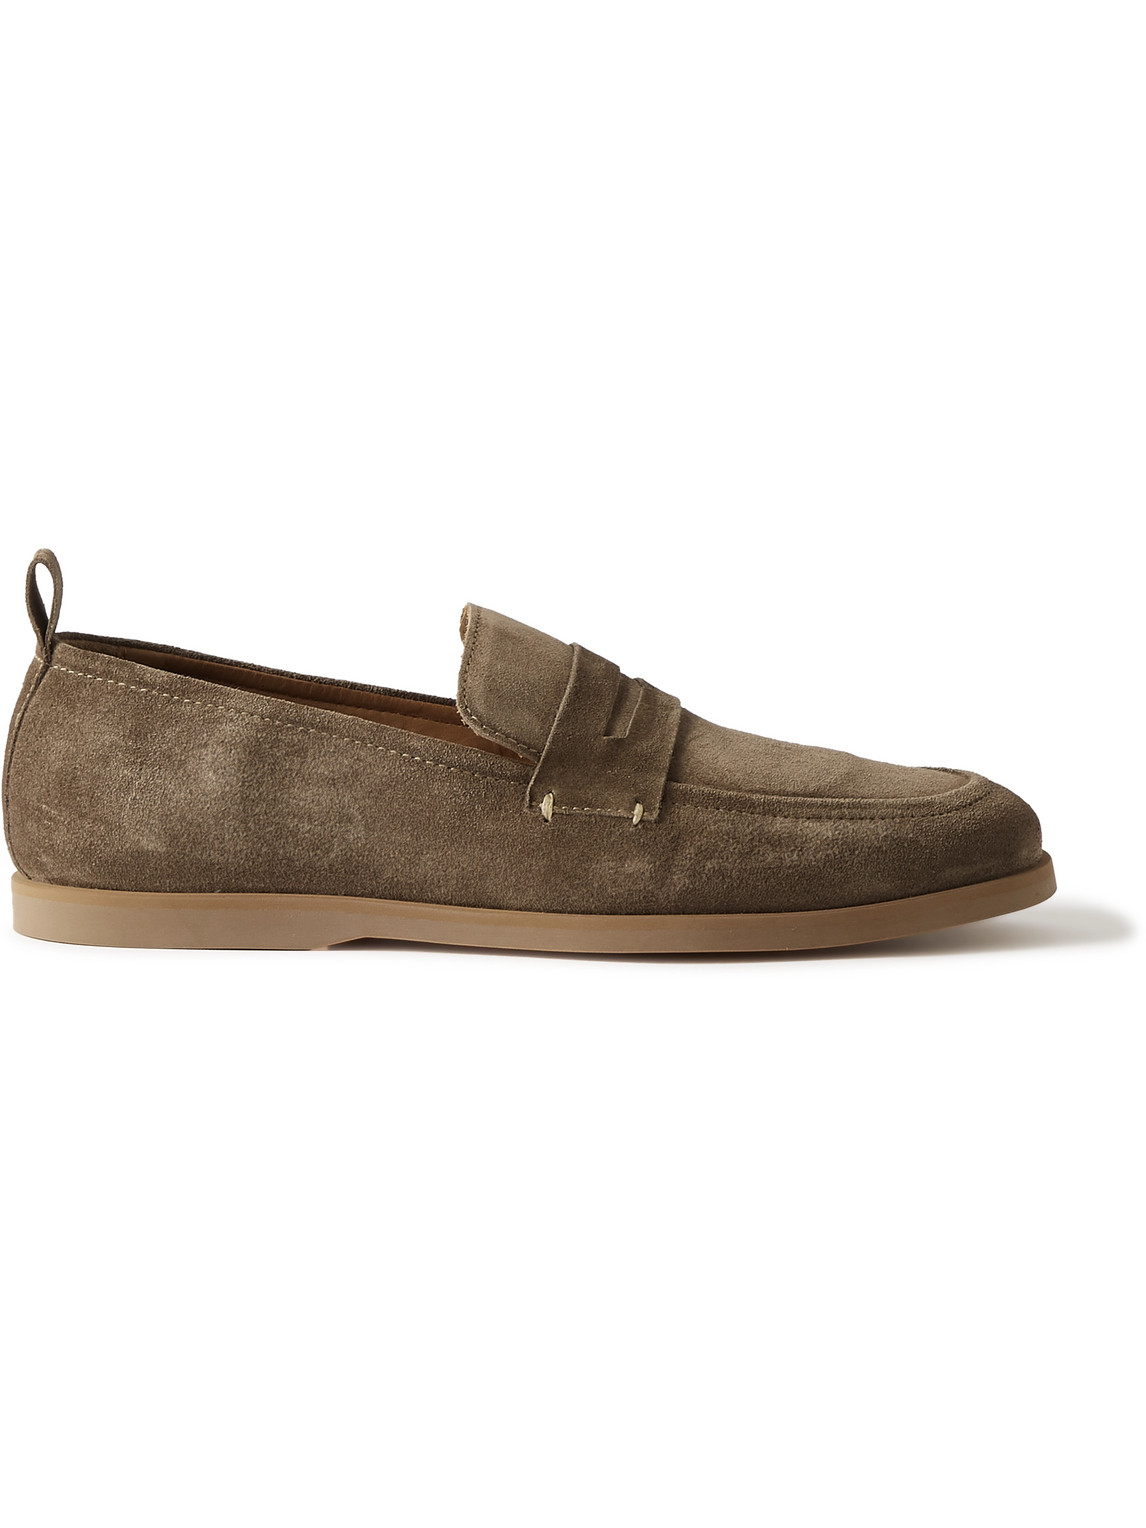 Mr P. Leo Suede Penny Loafers In Brown